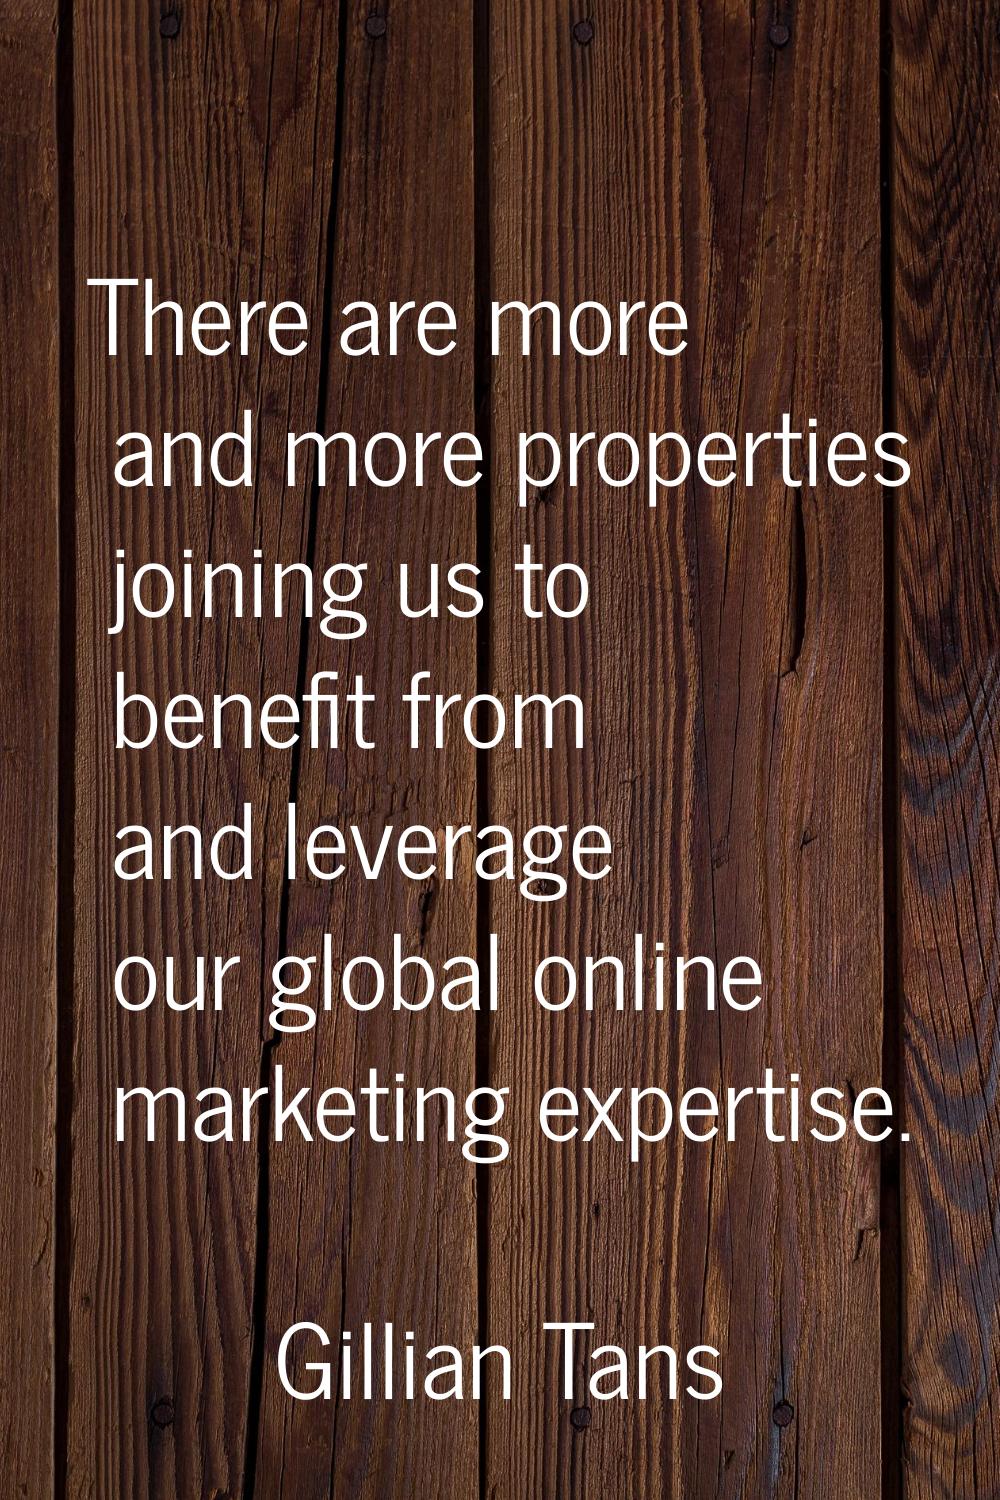 There are more and more properties joining us to benefit from and leverage our global online market